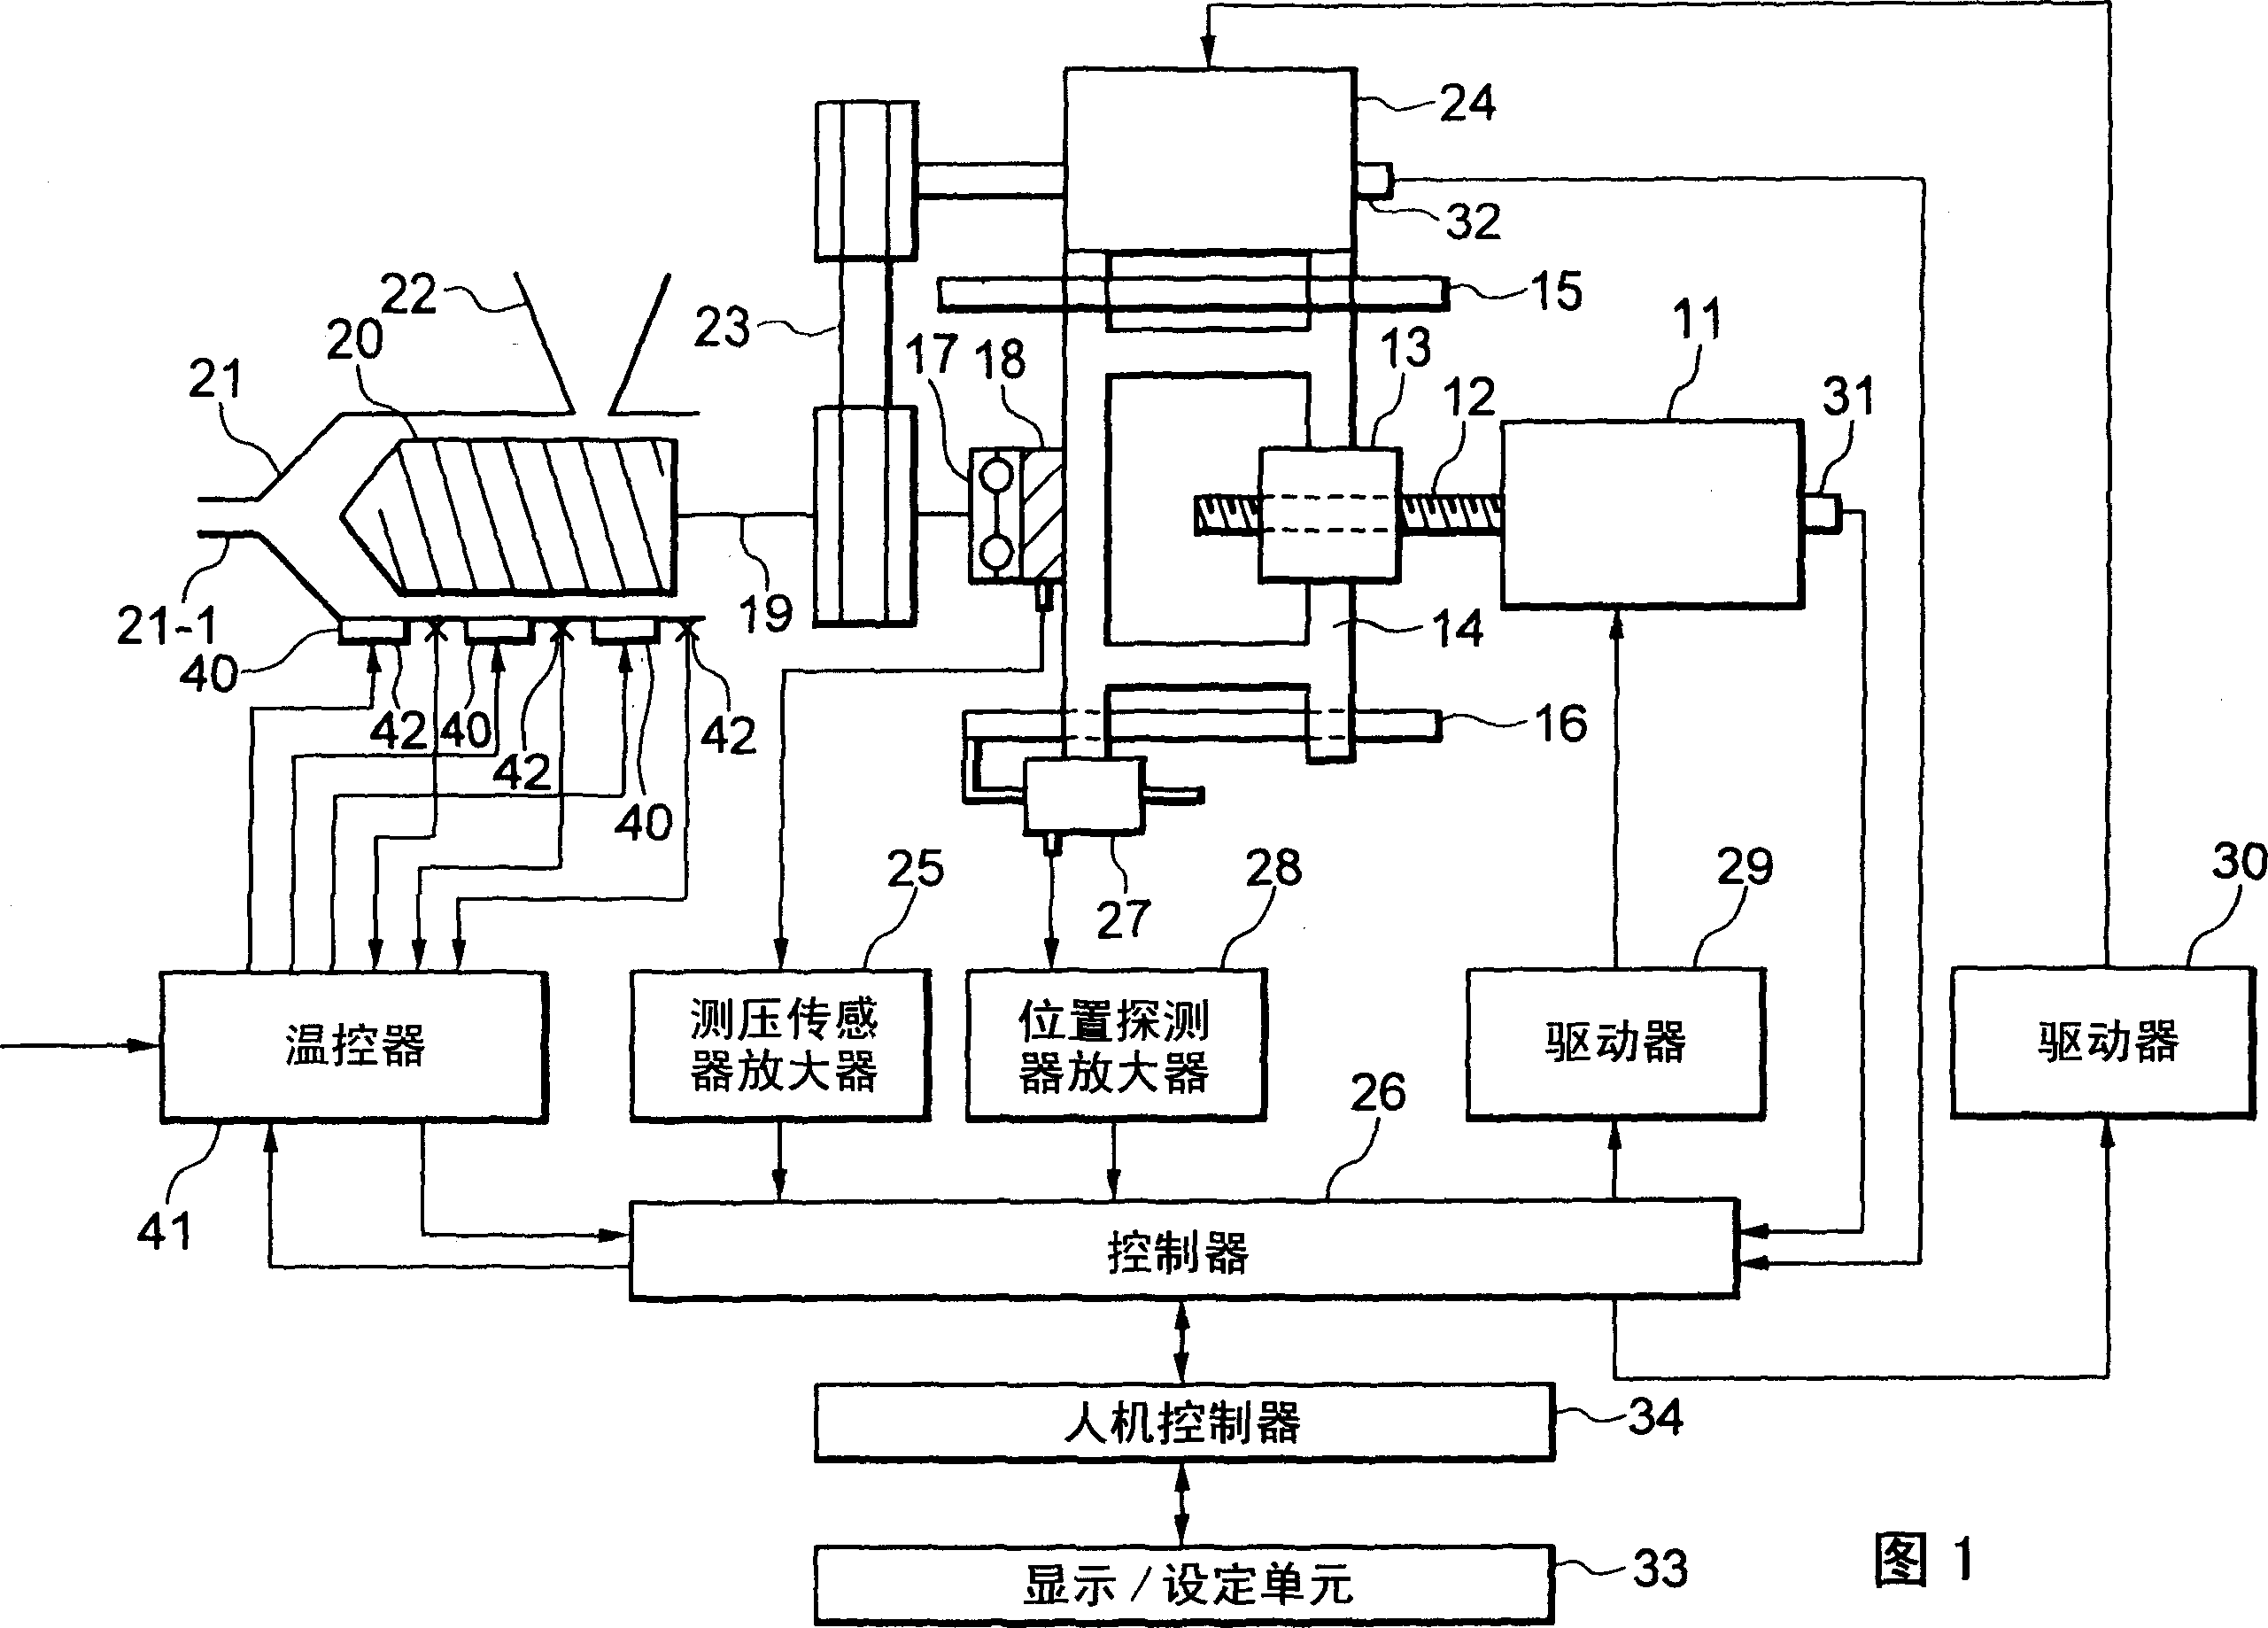 Injectio moulding machine control method for reducing weight change of moulded product